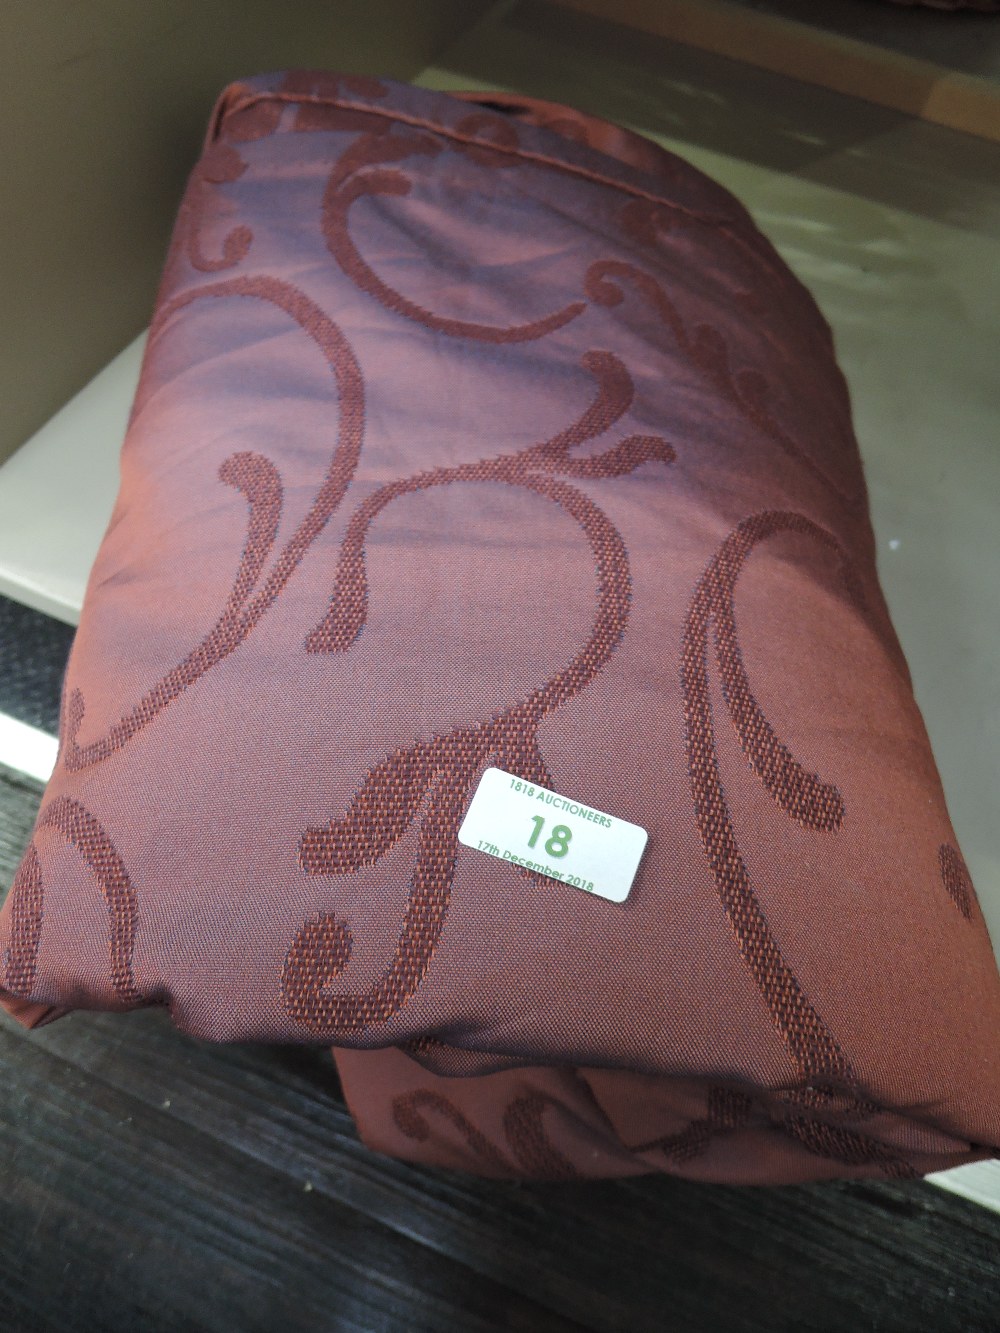 A decorative throw/bedspread of poly cotton swirl design